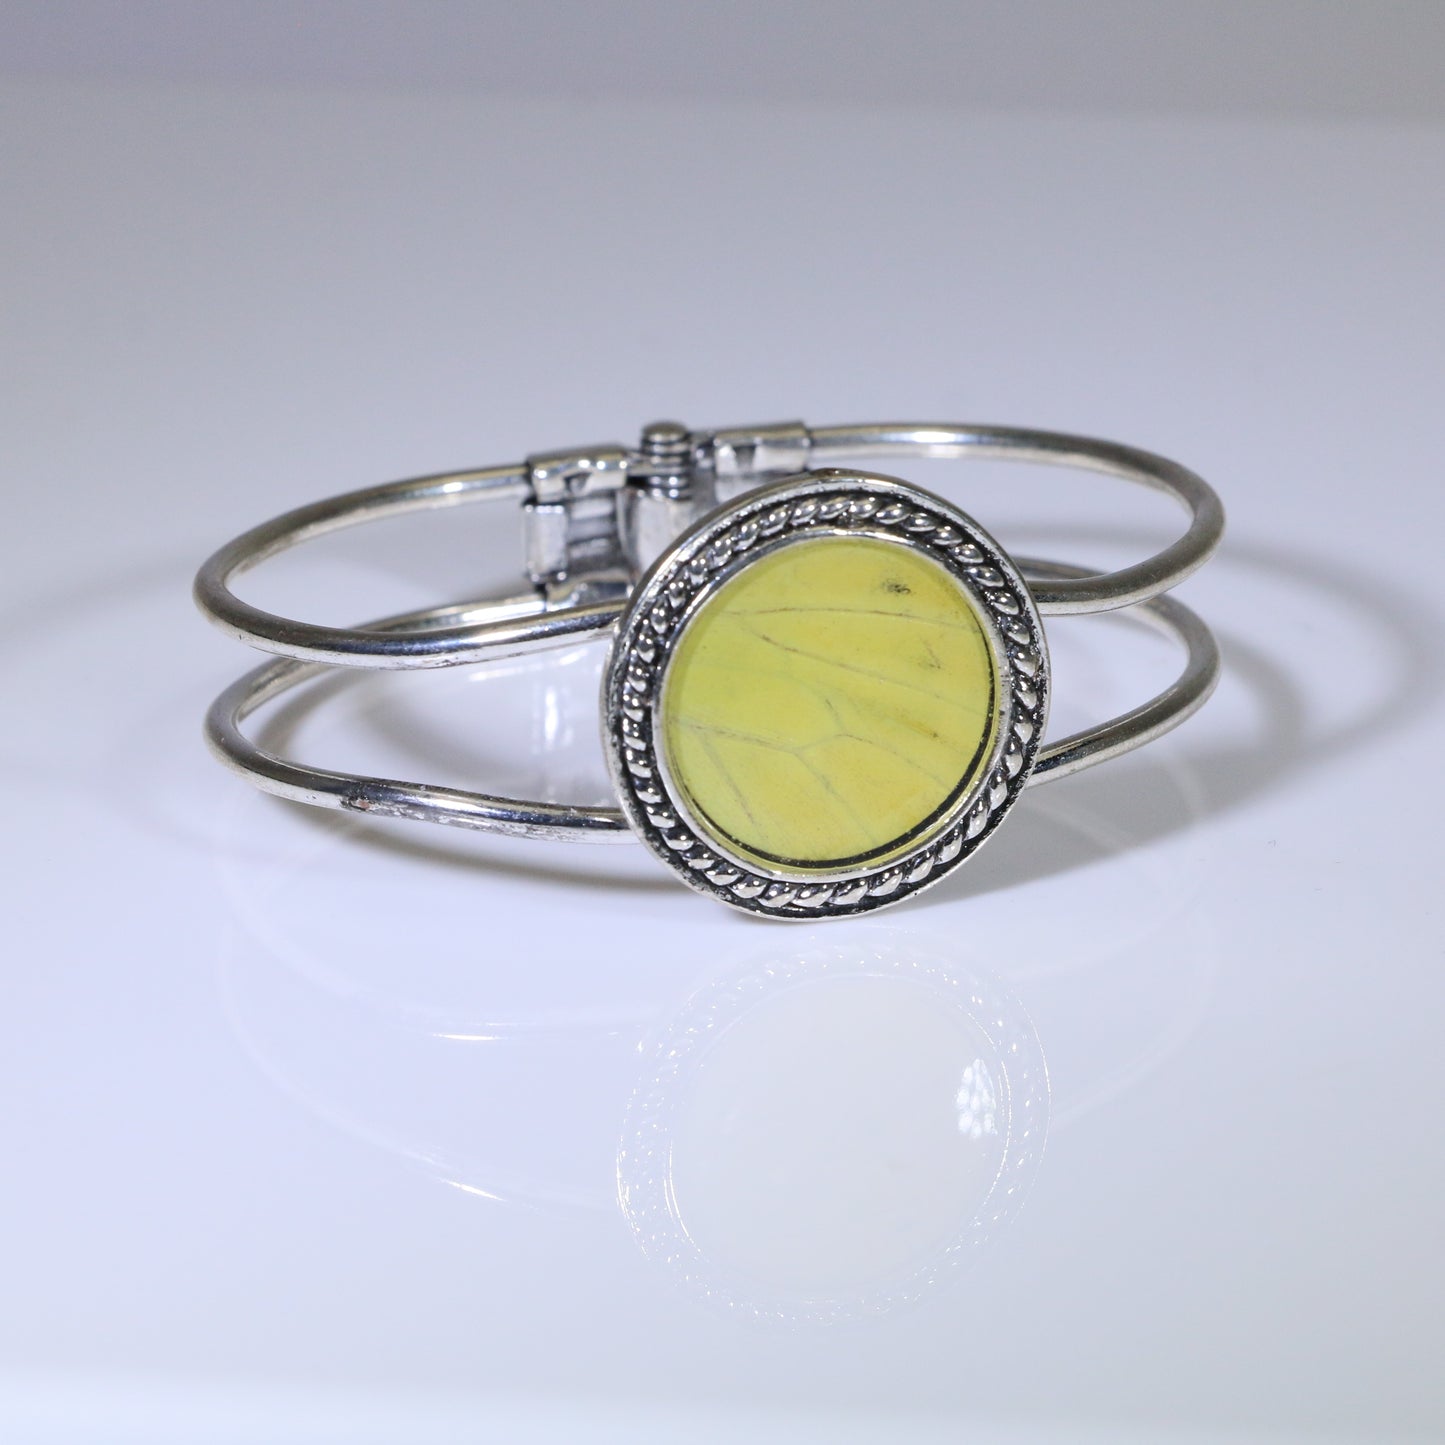 53006 - Real Butterfly Wing Jewelry - Bracelet Collection -Vibrant Sulphur Butterfly - Yellow